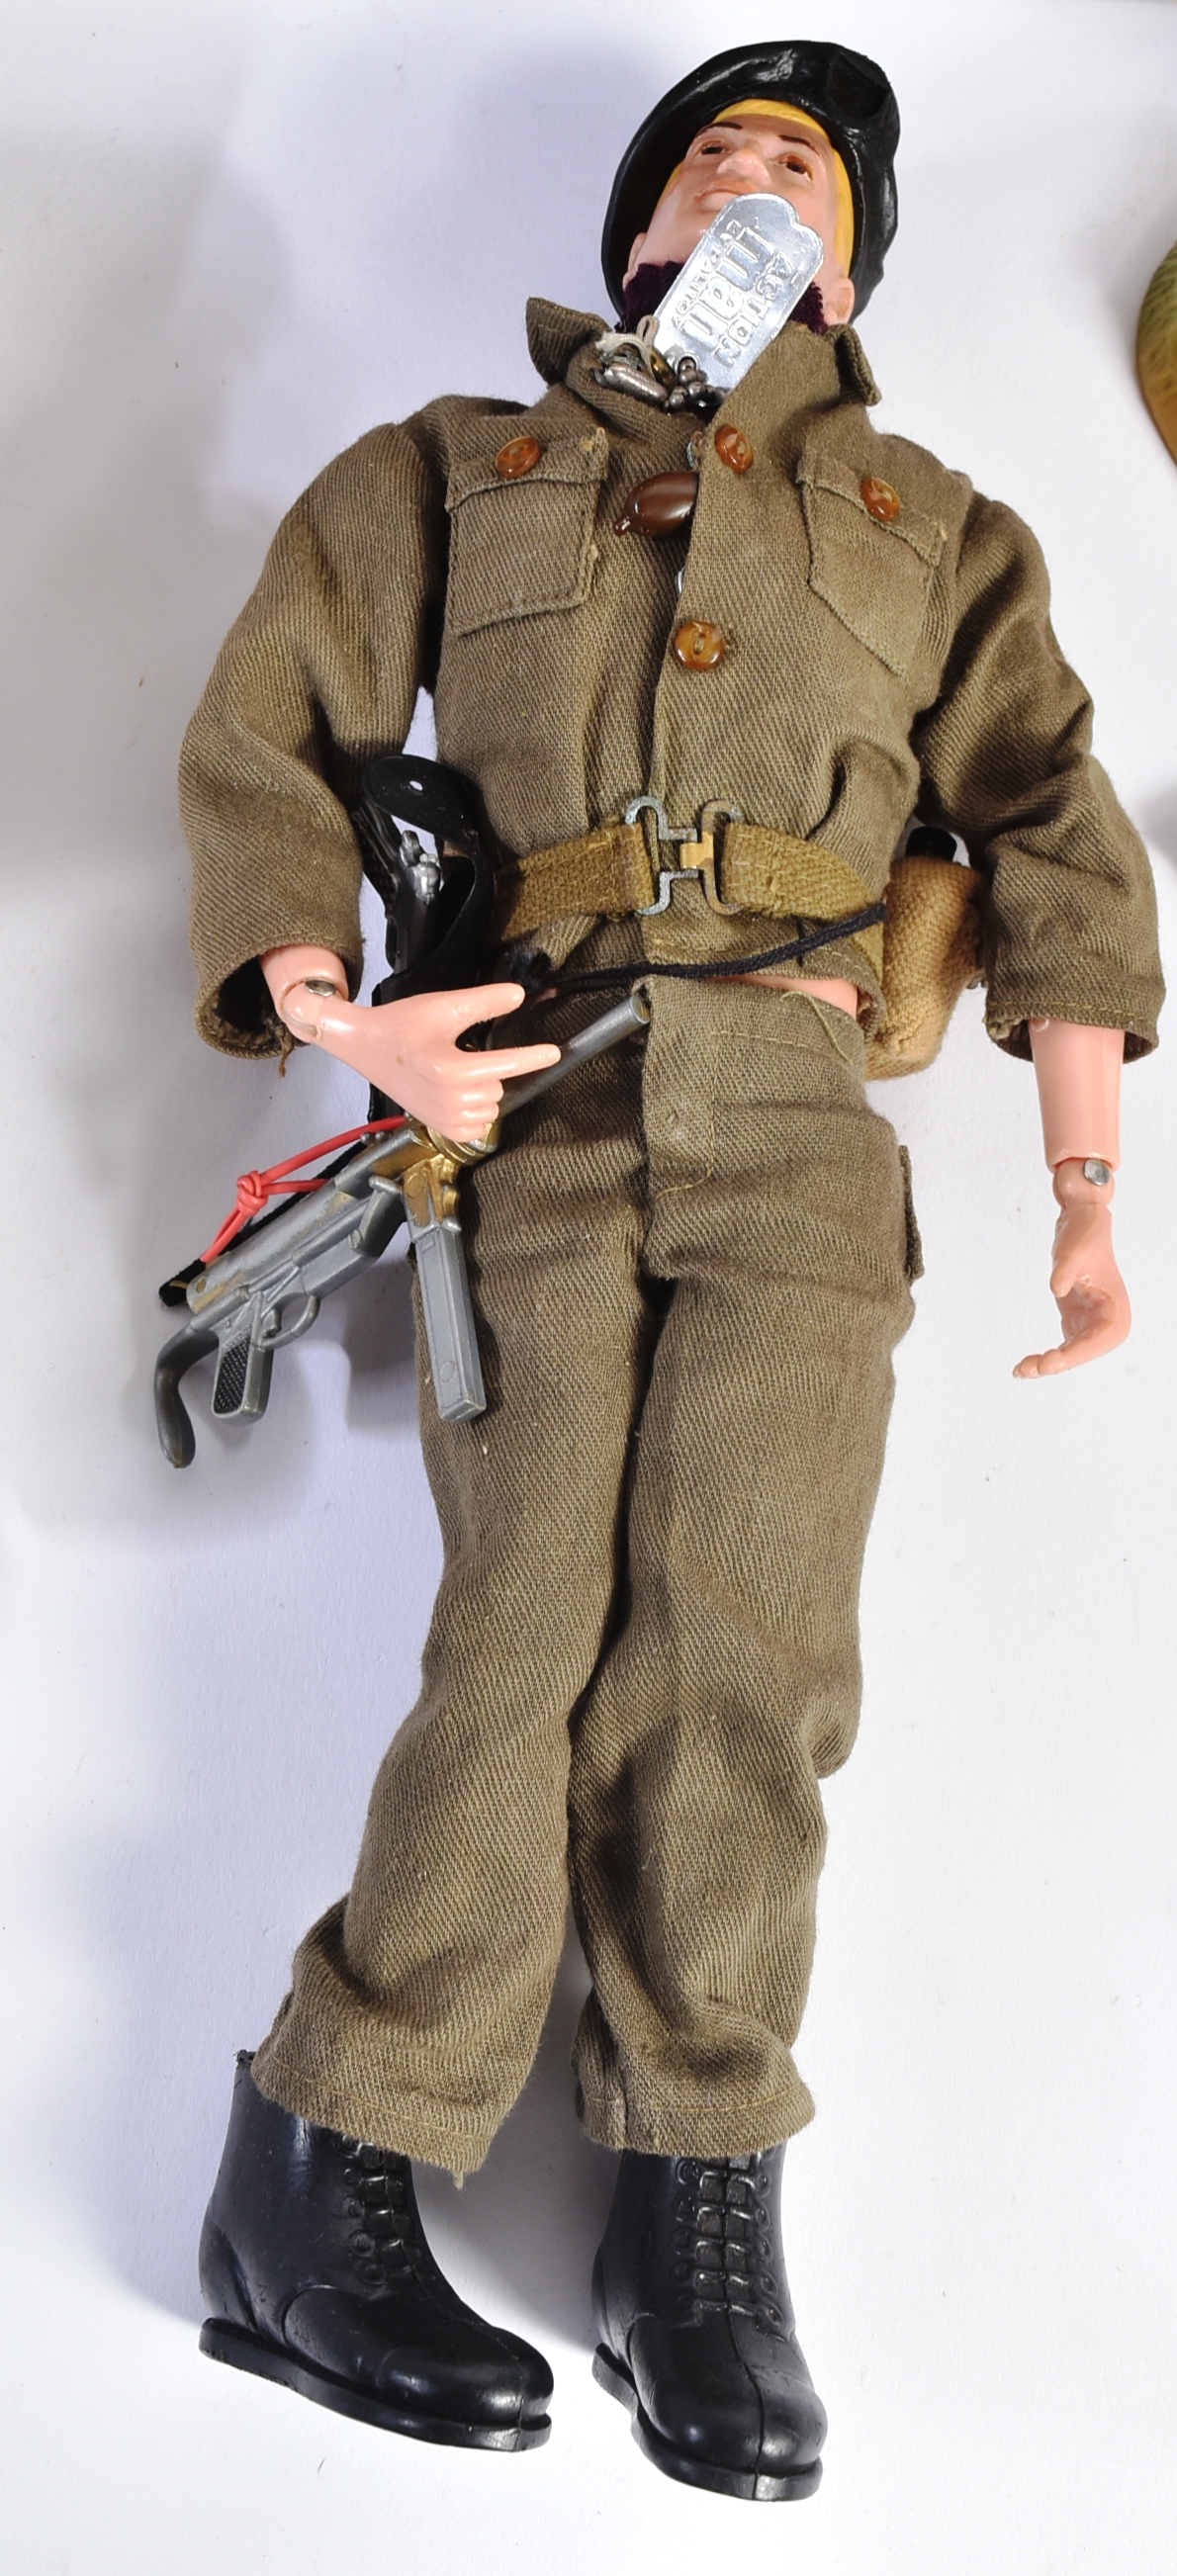 ACTION MAN - COLLECTION OF VINTAGE PALITOY ACTION MAN ITEMS ETC - Image 3 of 6